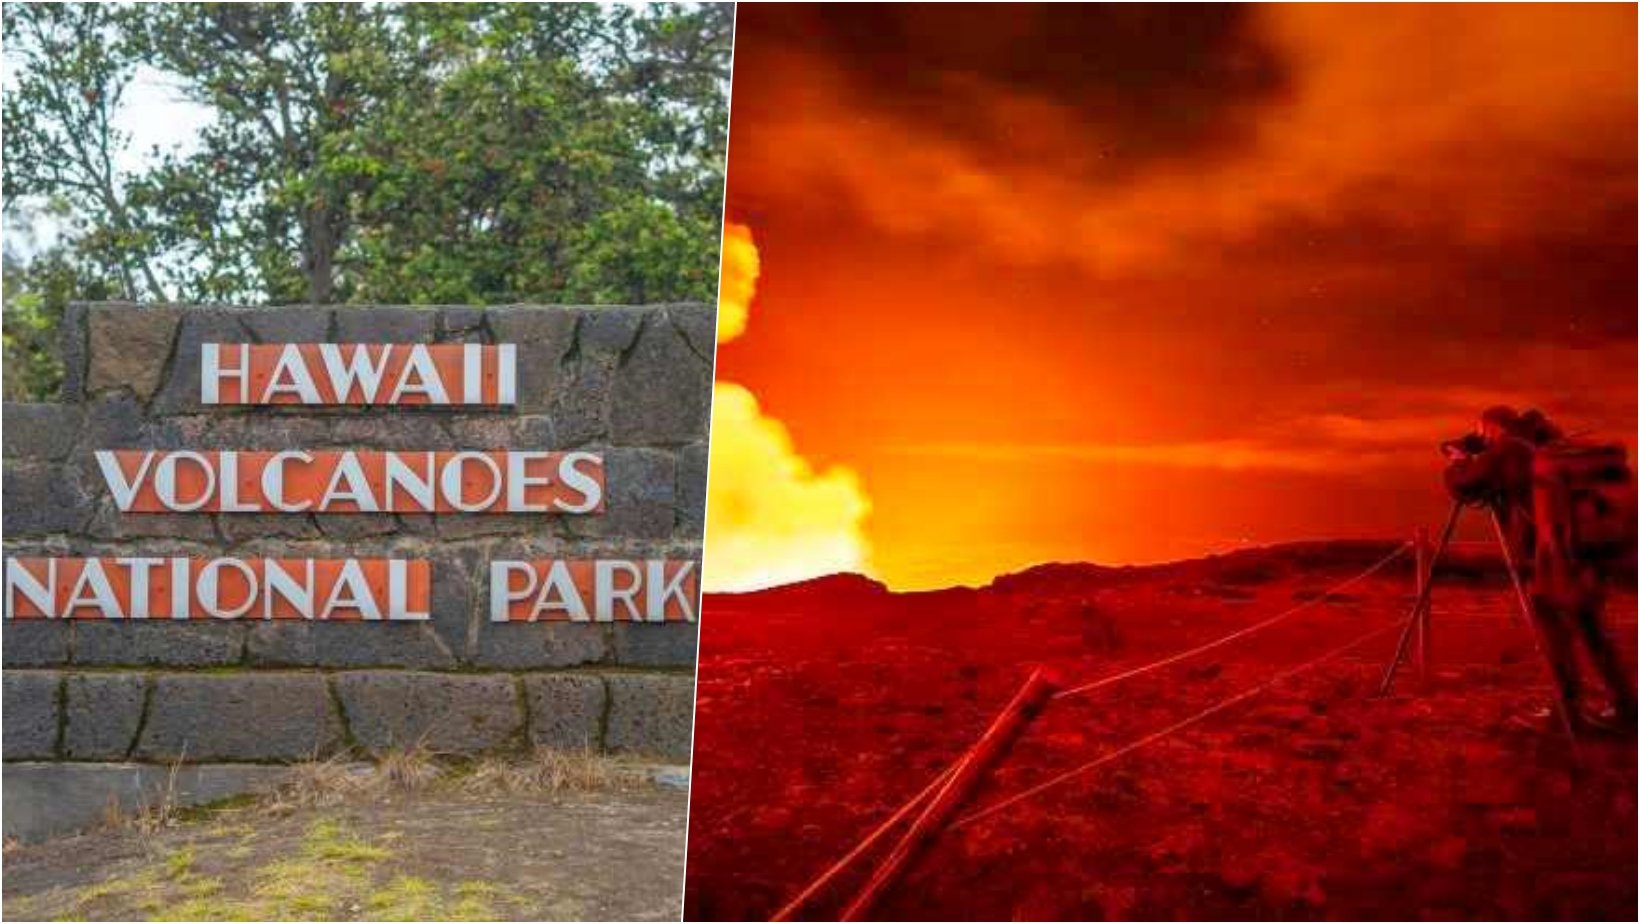 6 facebook cover 4.jpg?resize=1200,630 - Man Dies After Falling From The Viewing Platform Of Hawaii’s Most Active Volcano